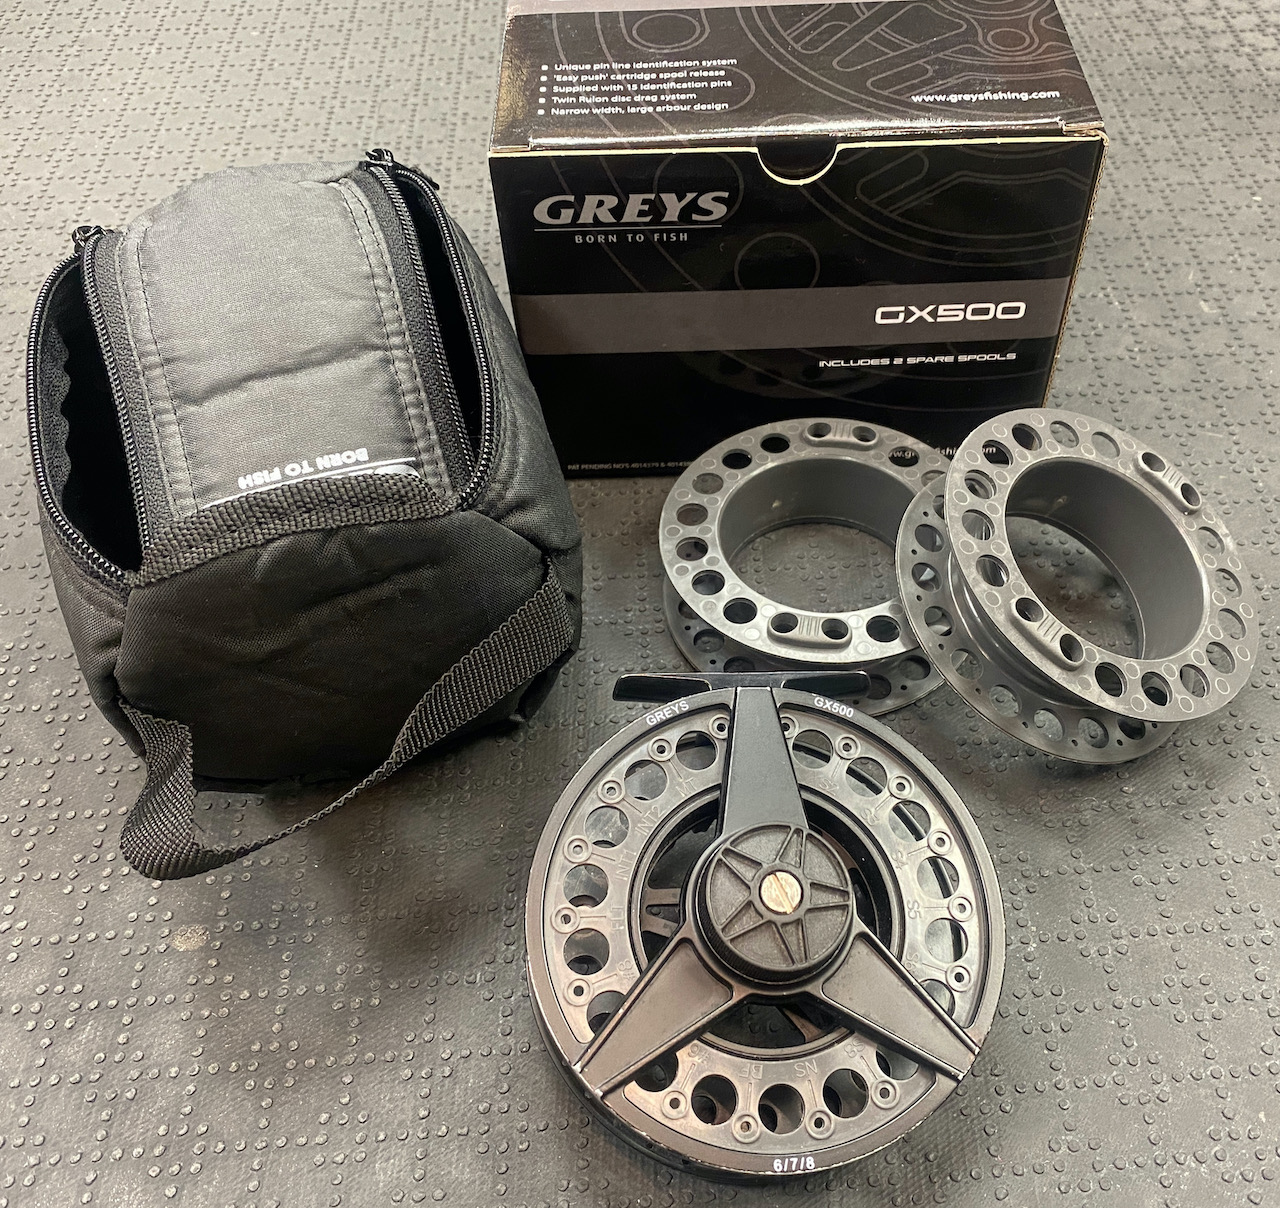 Greys GX500 678 Fly Reel and 2 Spare Spools BB – The First Cast